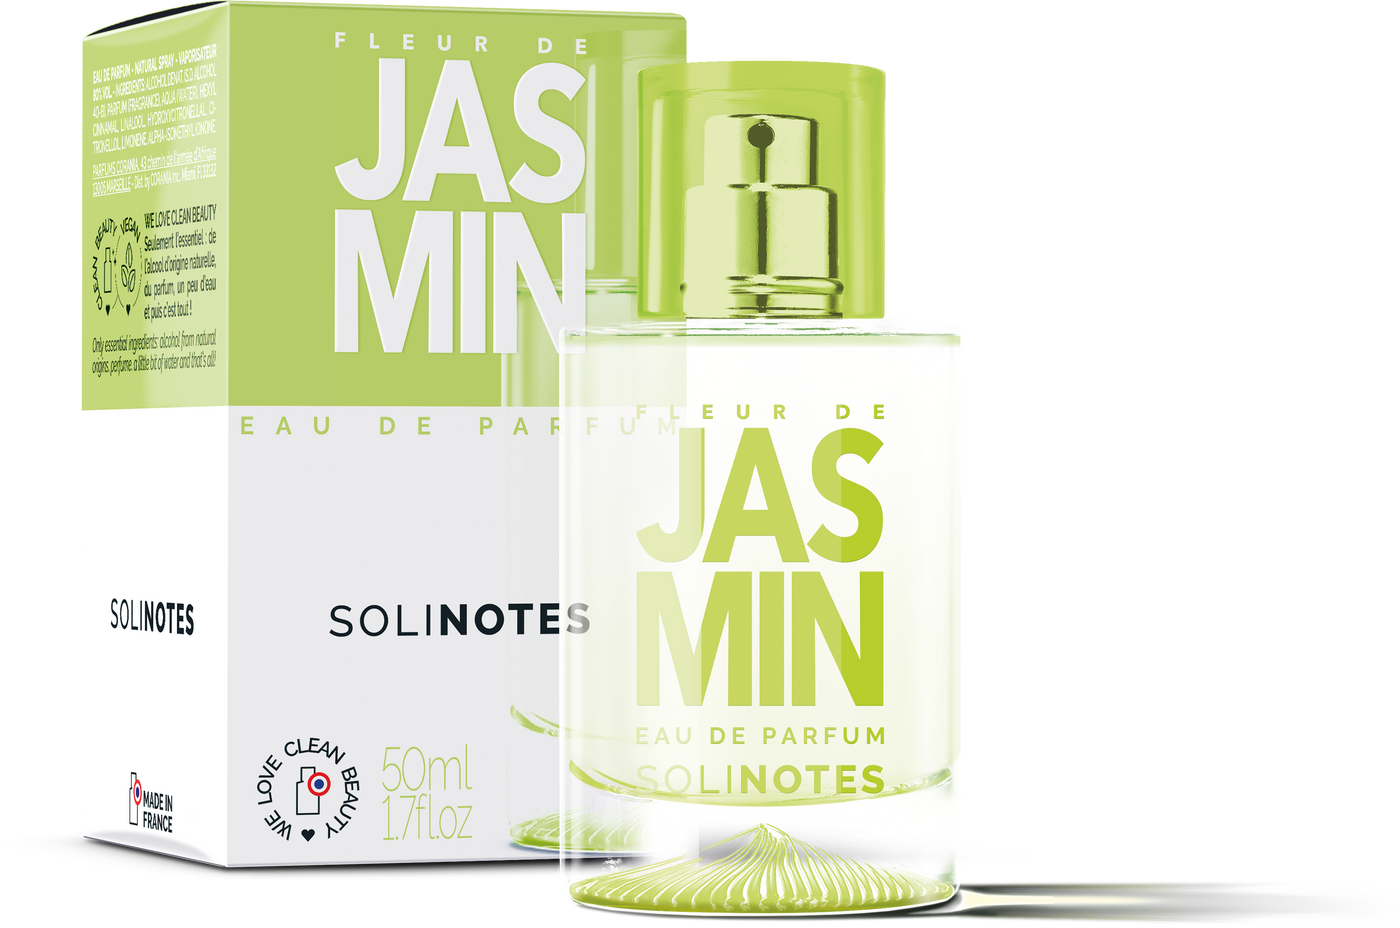 Solinotes (US Stores) - Distributed by Scents of Europe Jasmine Eau de Parfum 1.7 oz - CLEAN BEAUTY - Simple Good